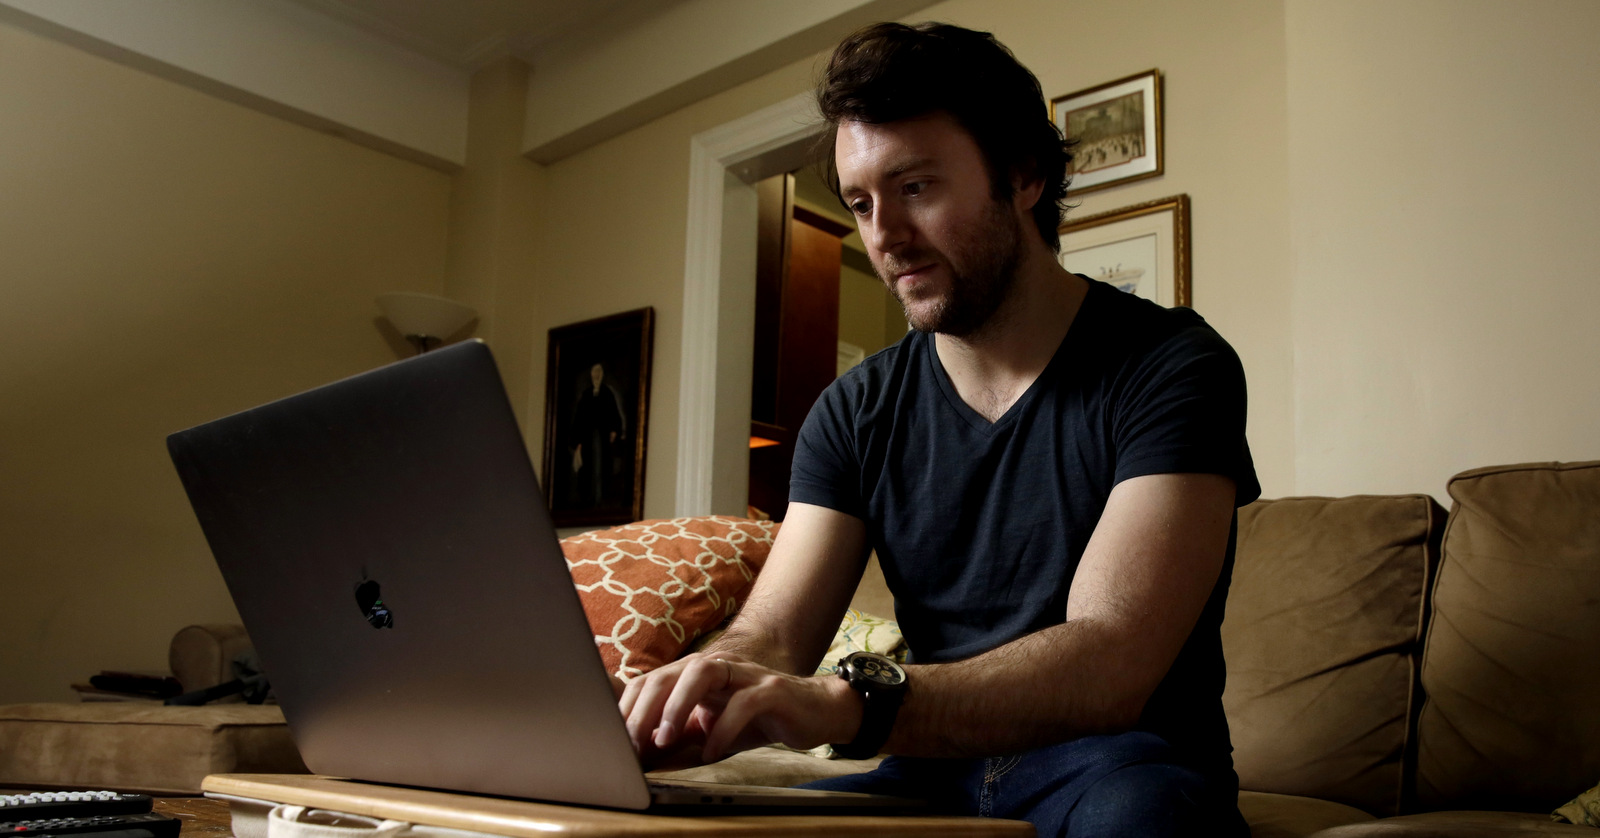 Michael Weiss works on his laptop in his apartment on New York's Upper West Side, Dec. 8, 2017. (AP/Richard Drew)